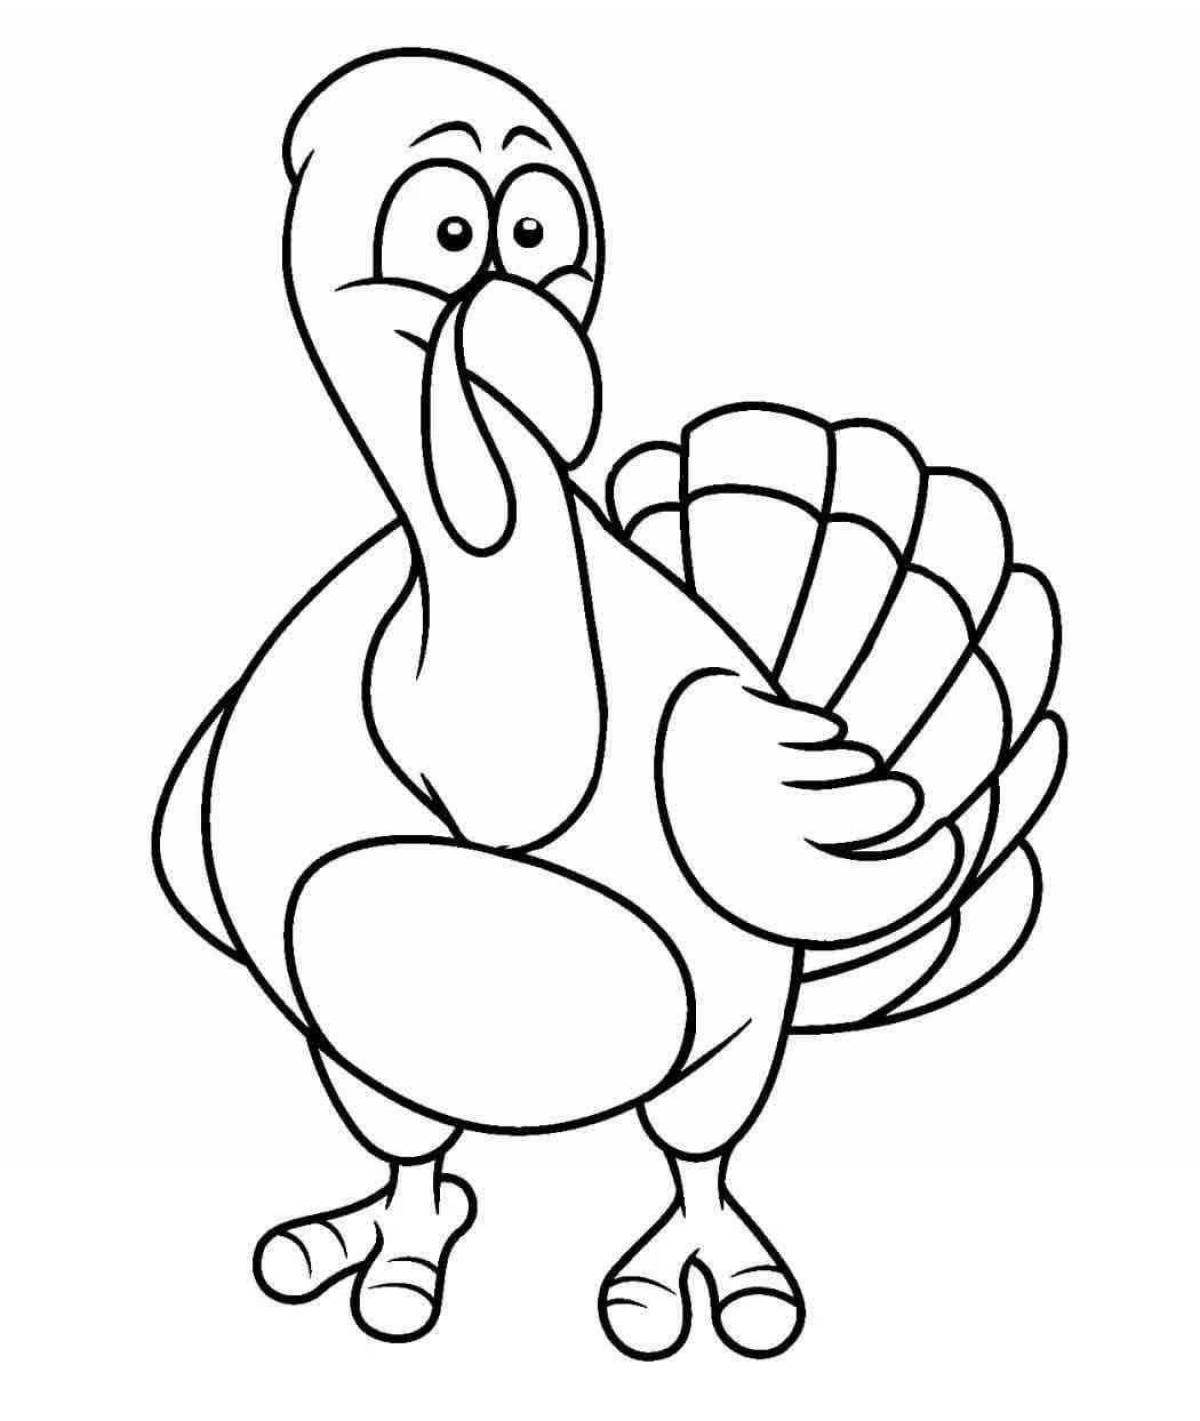 Sweet turkey coloring book for kids